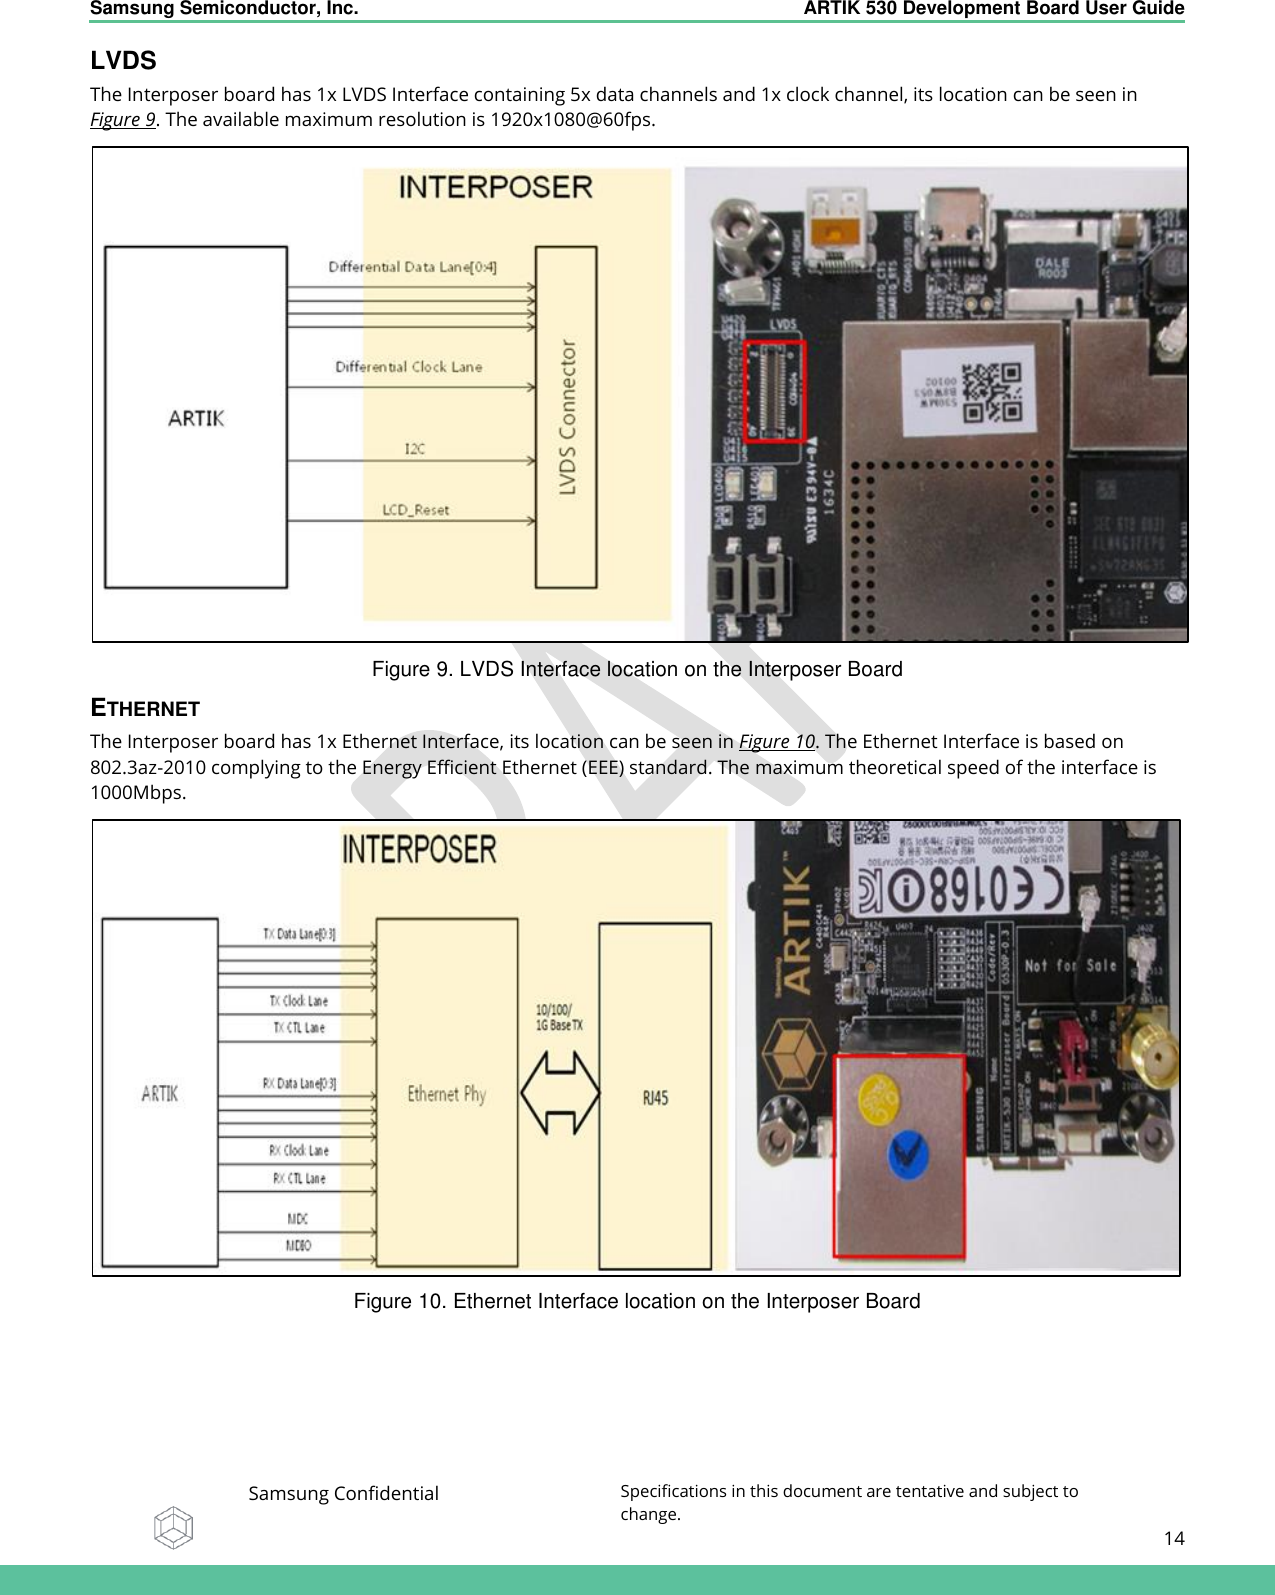    Samsung Semiconductor, Inc.  ARTIK 530 Development Board User Guide   Samsung Confidential Specifications in this document are tentative and subject to change.  14   LVDS The Interposer board has 1x LVDS Interface containing 5x data channels and 1x clock channel, its location can be seen in Figure 9. The available maximum resolution is 1920x1080@60fps.  Figure 9. LVDS Interface location on the Interposer Board ETHERNET The Interposer board has 1x Ethernet Interface, its location can be seen in Figure 10. The Ethernet Interface is based on 802.3az-2010 complying to the Energy Efficient Ethernet (EEE) standard. The maximum theoretical speed of the interface is 1000Mbps.  Figure 10. Ethernet Interface location on the Interposer Board    